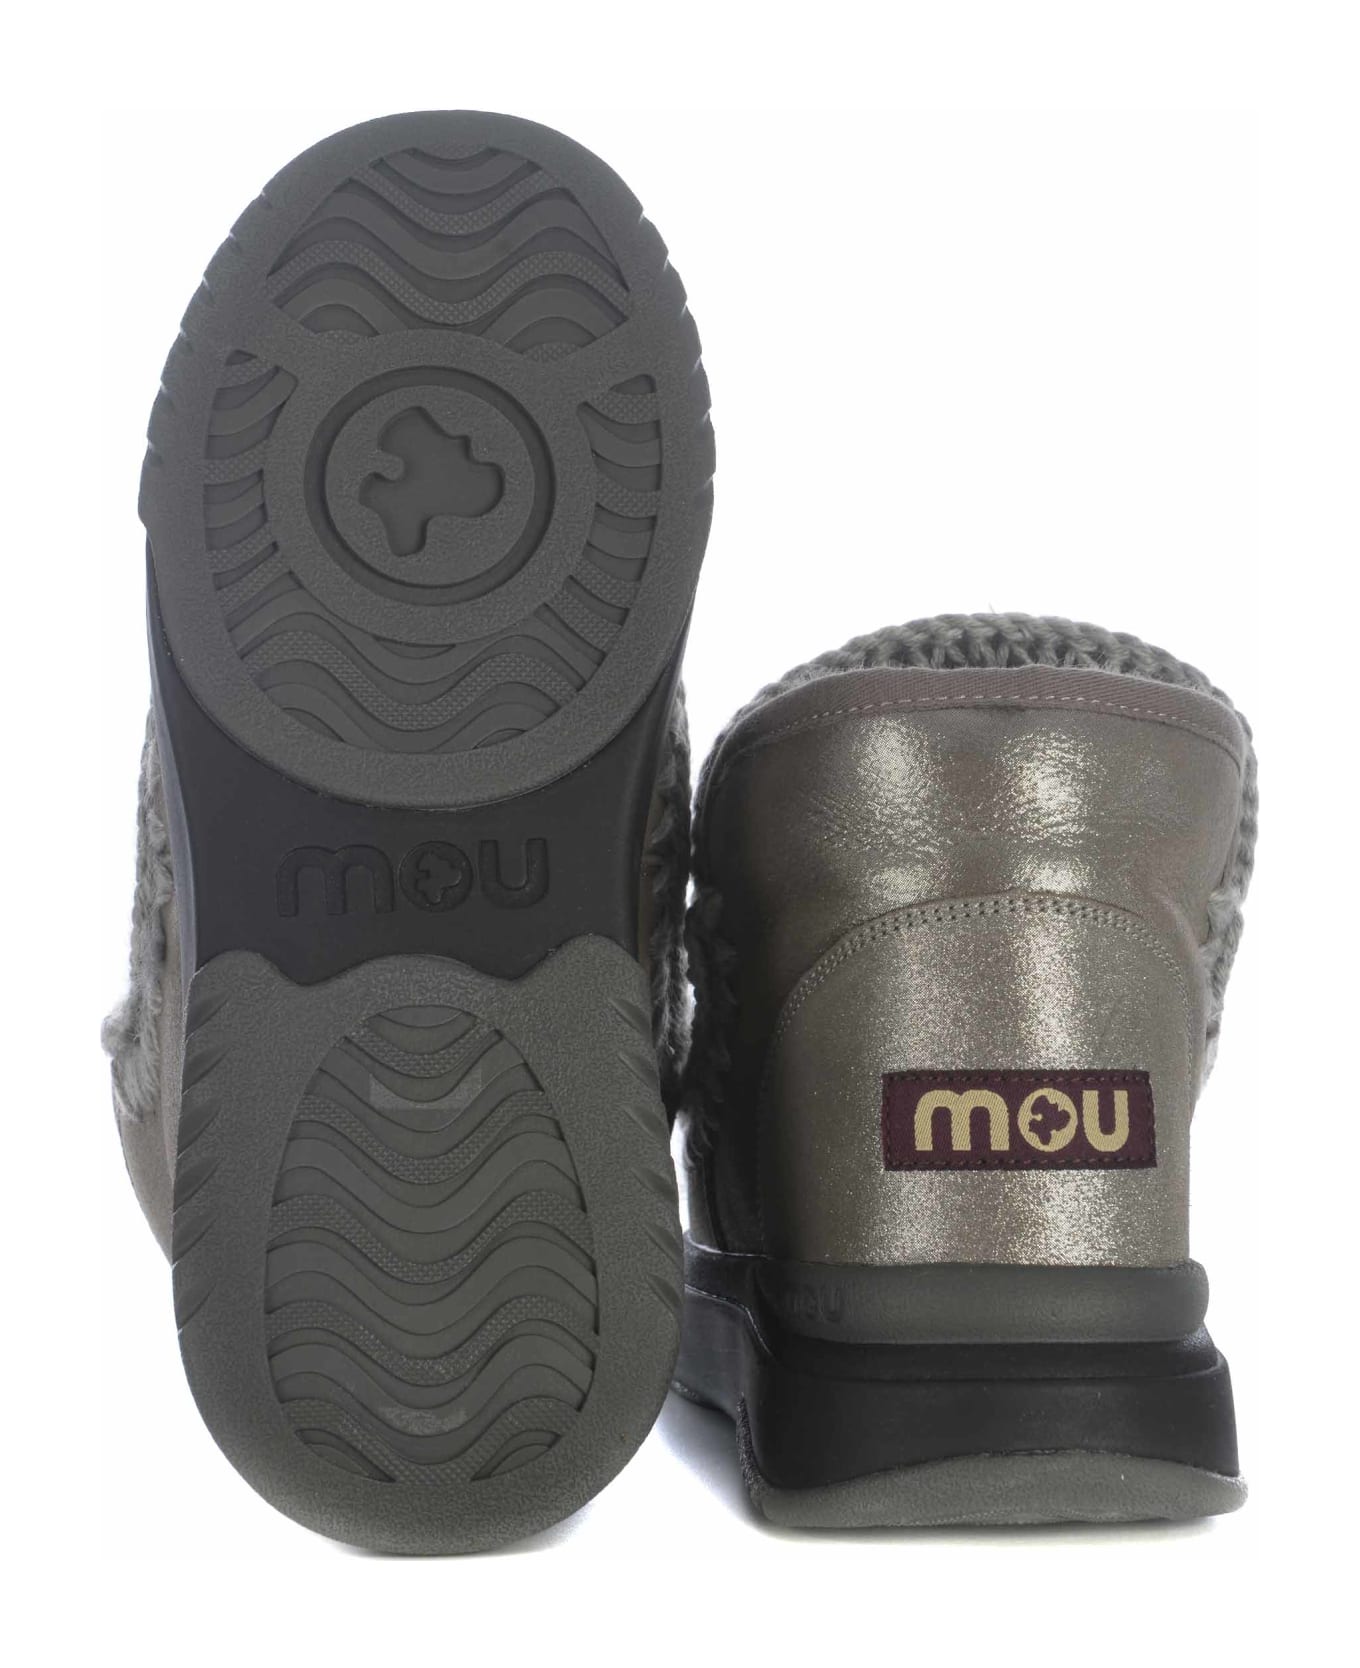 Mou Ankle Boots Mou "eskimo Jogger" Made Of Leather - Grigio argento